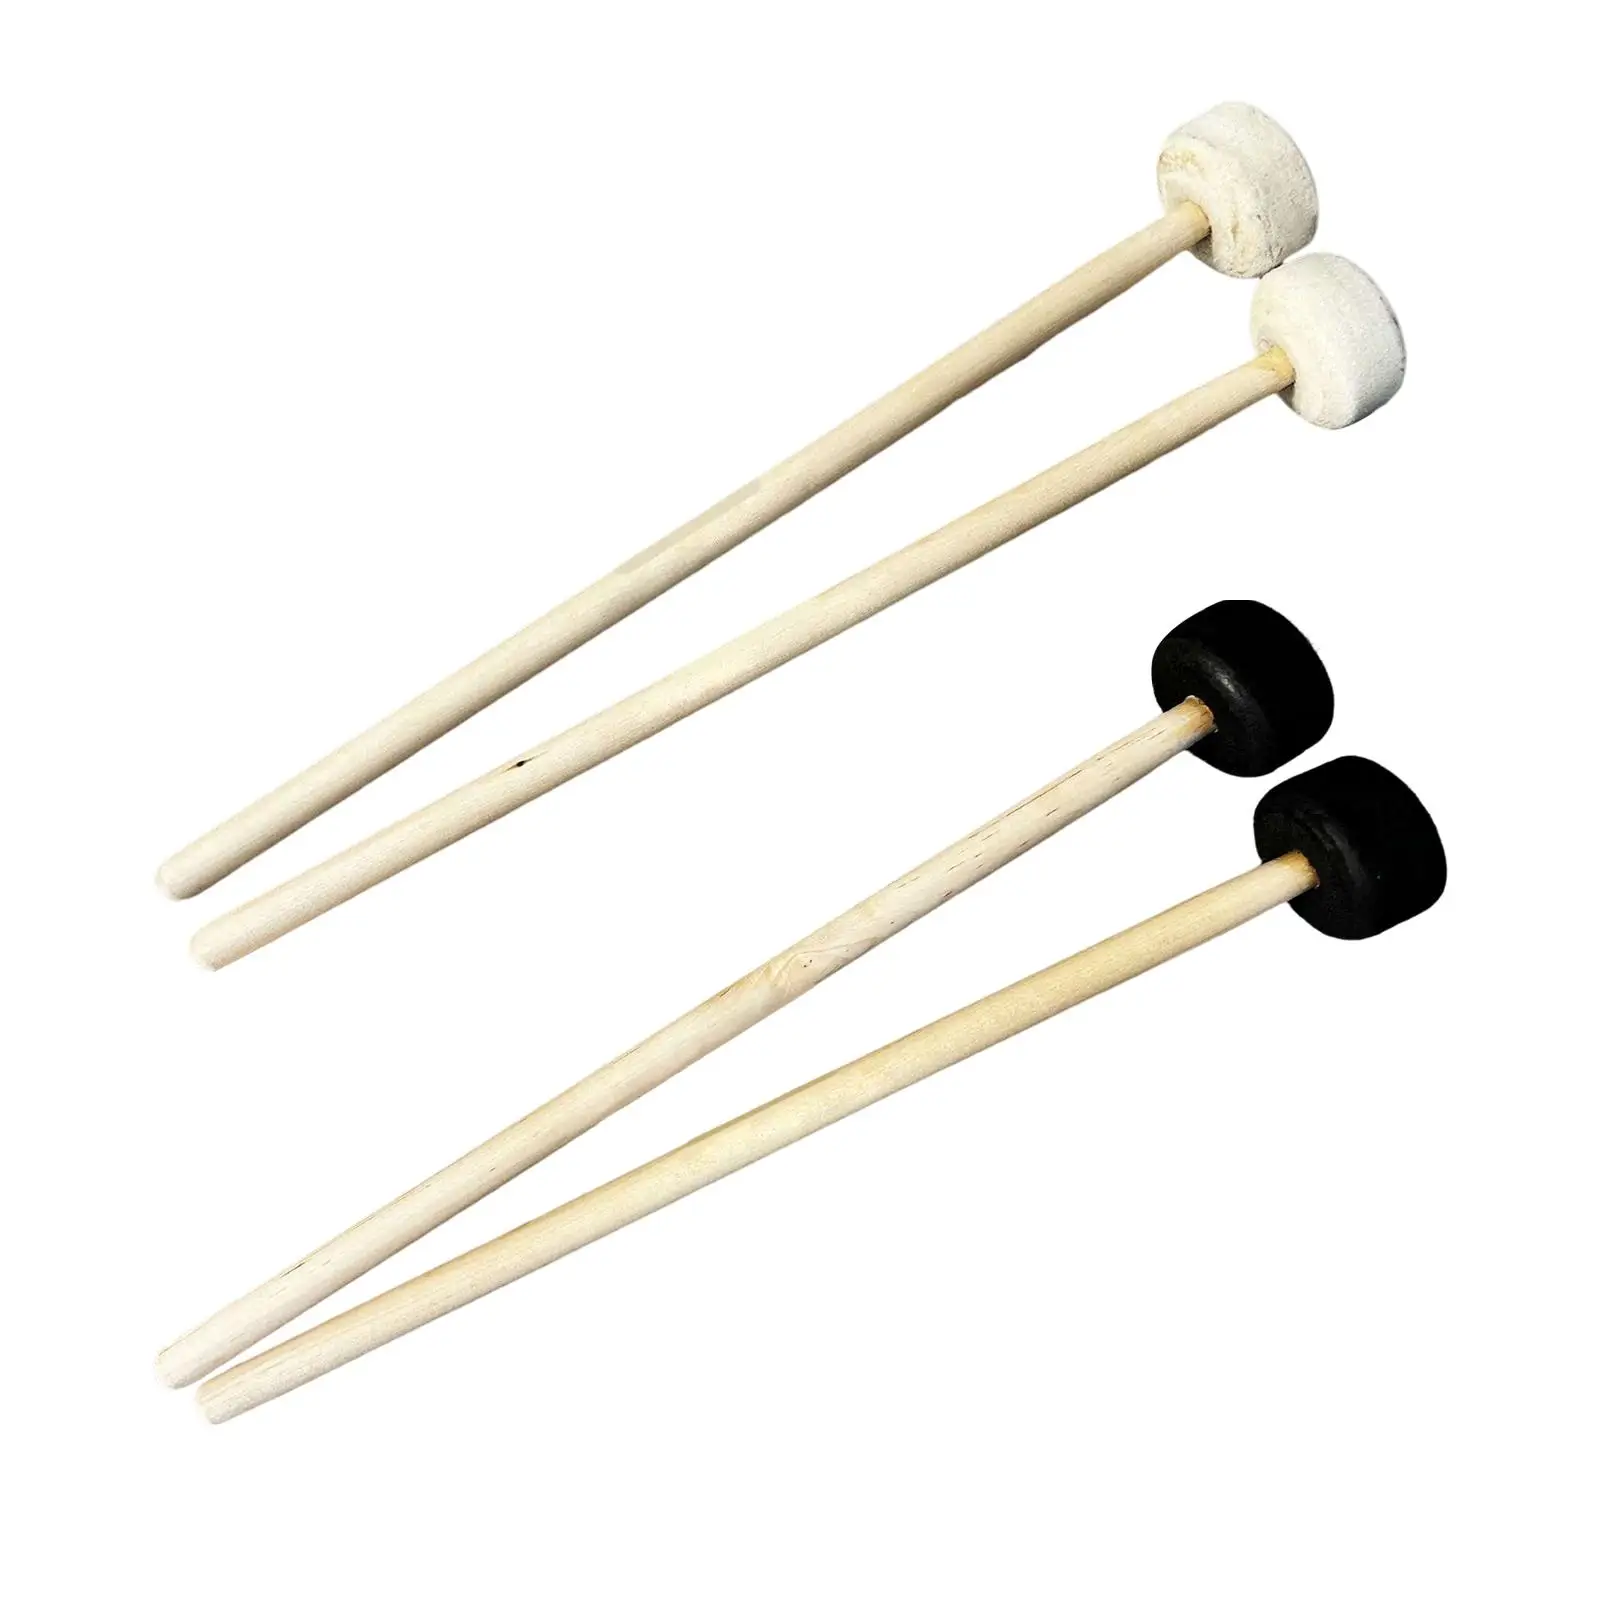 2x Drumsticks Percussion Accessories Wooden Handle Wear Resistant for Drum Music Education Snare Drum Lotus Drum Beginners